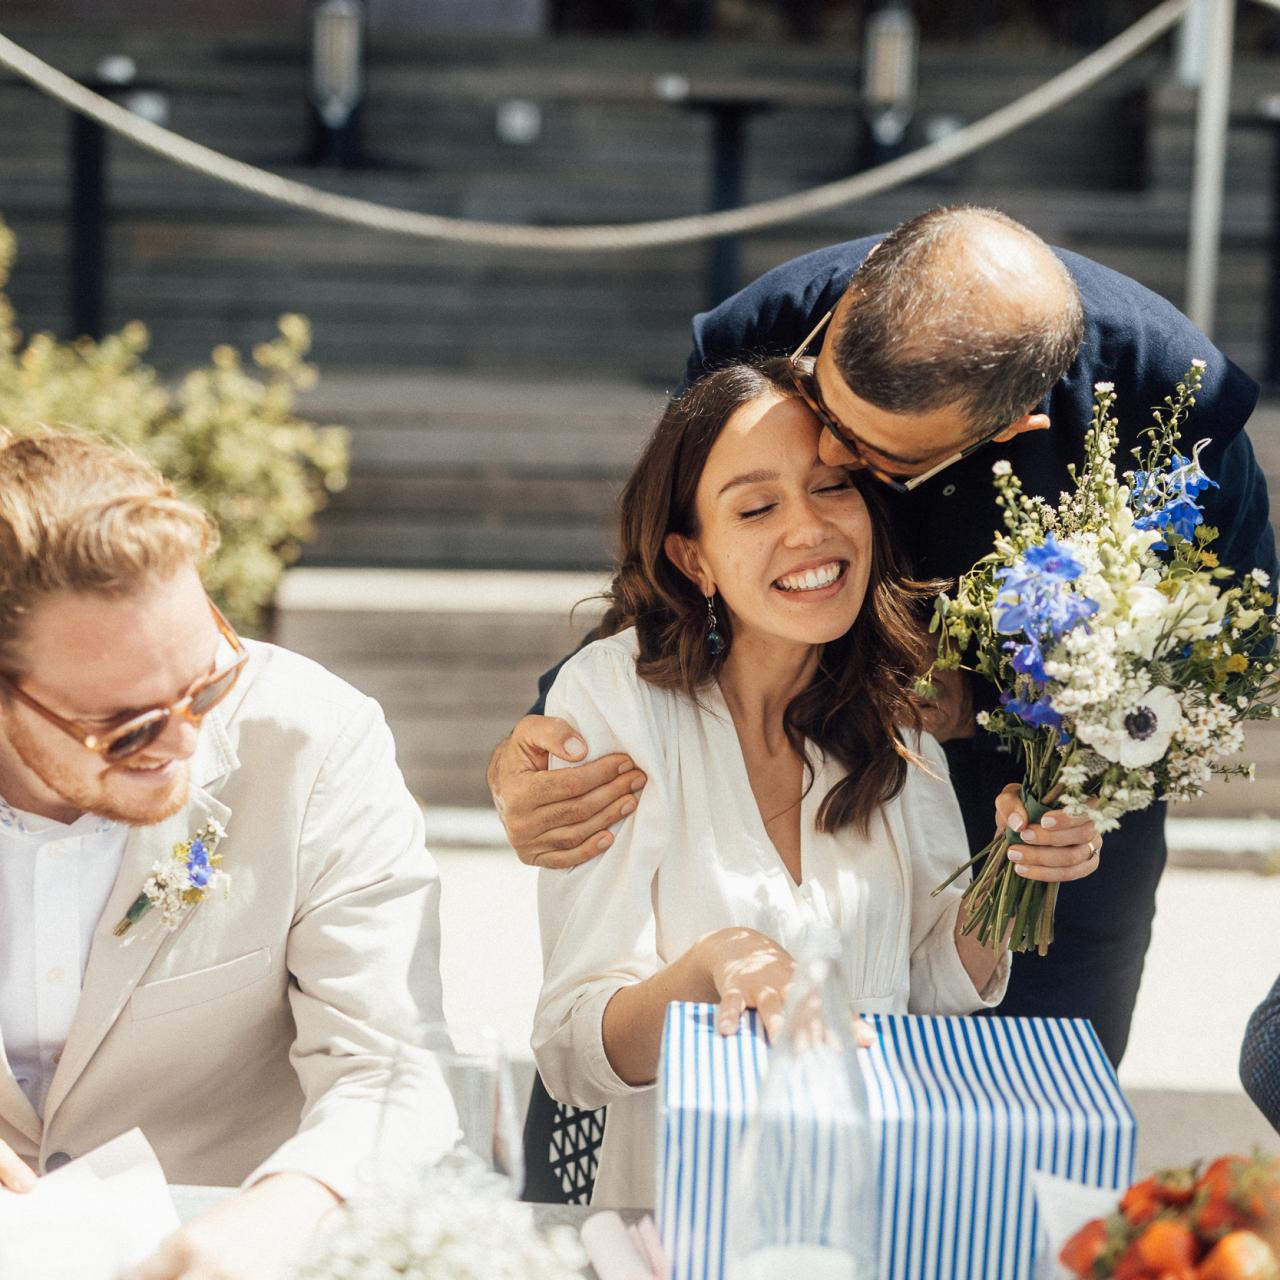 8 Unique Wedding Gifts All Newlyweds Need